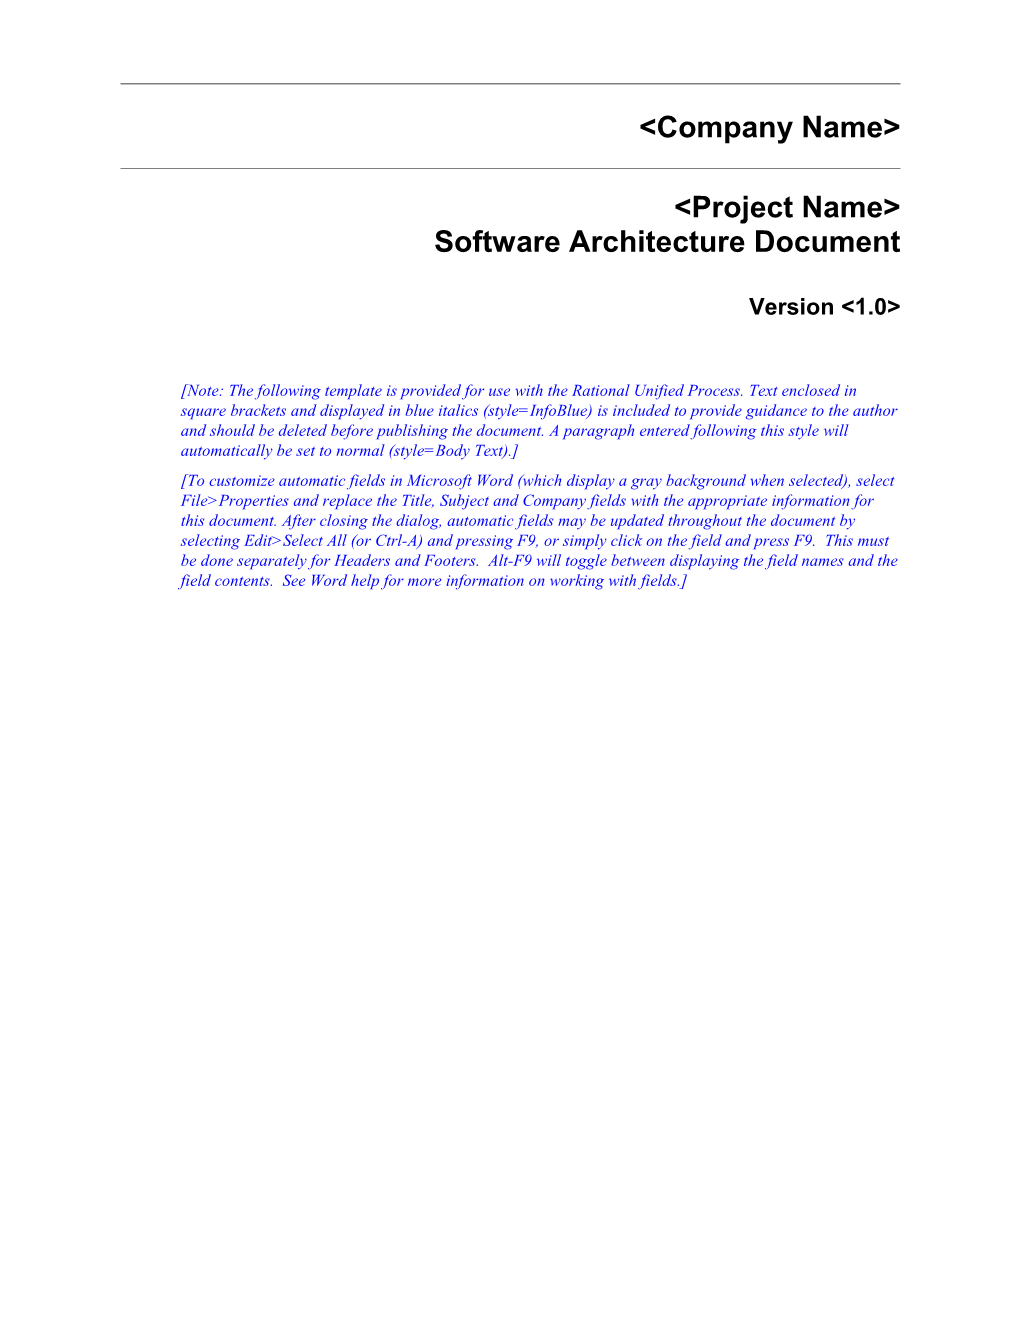 Software Architecture Document s1